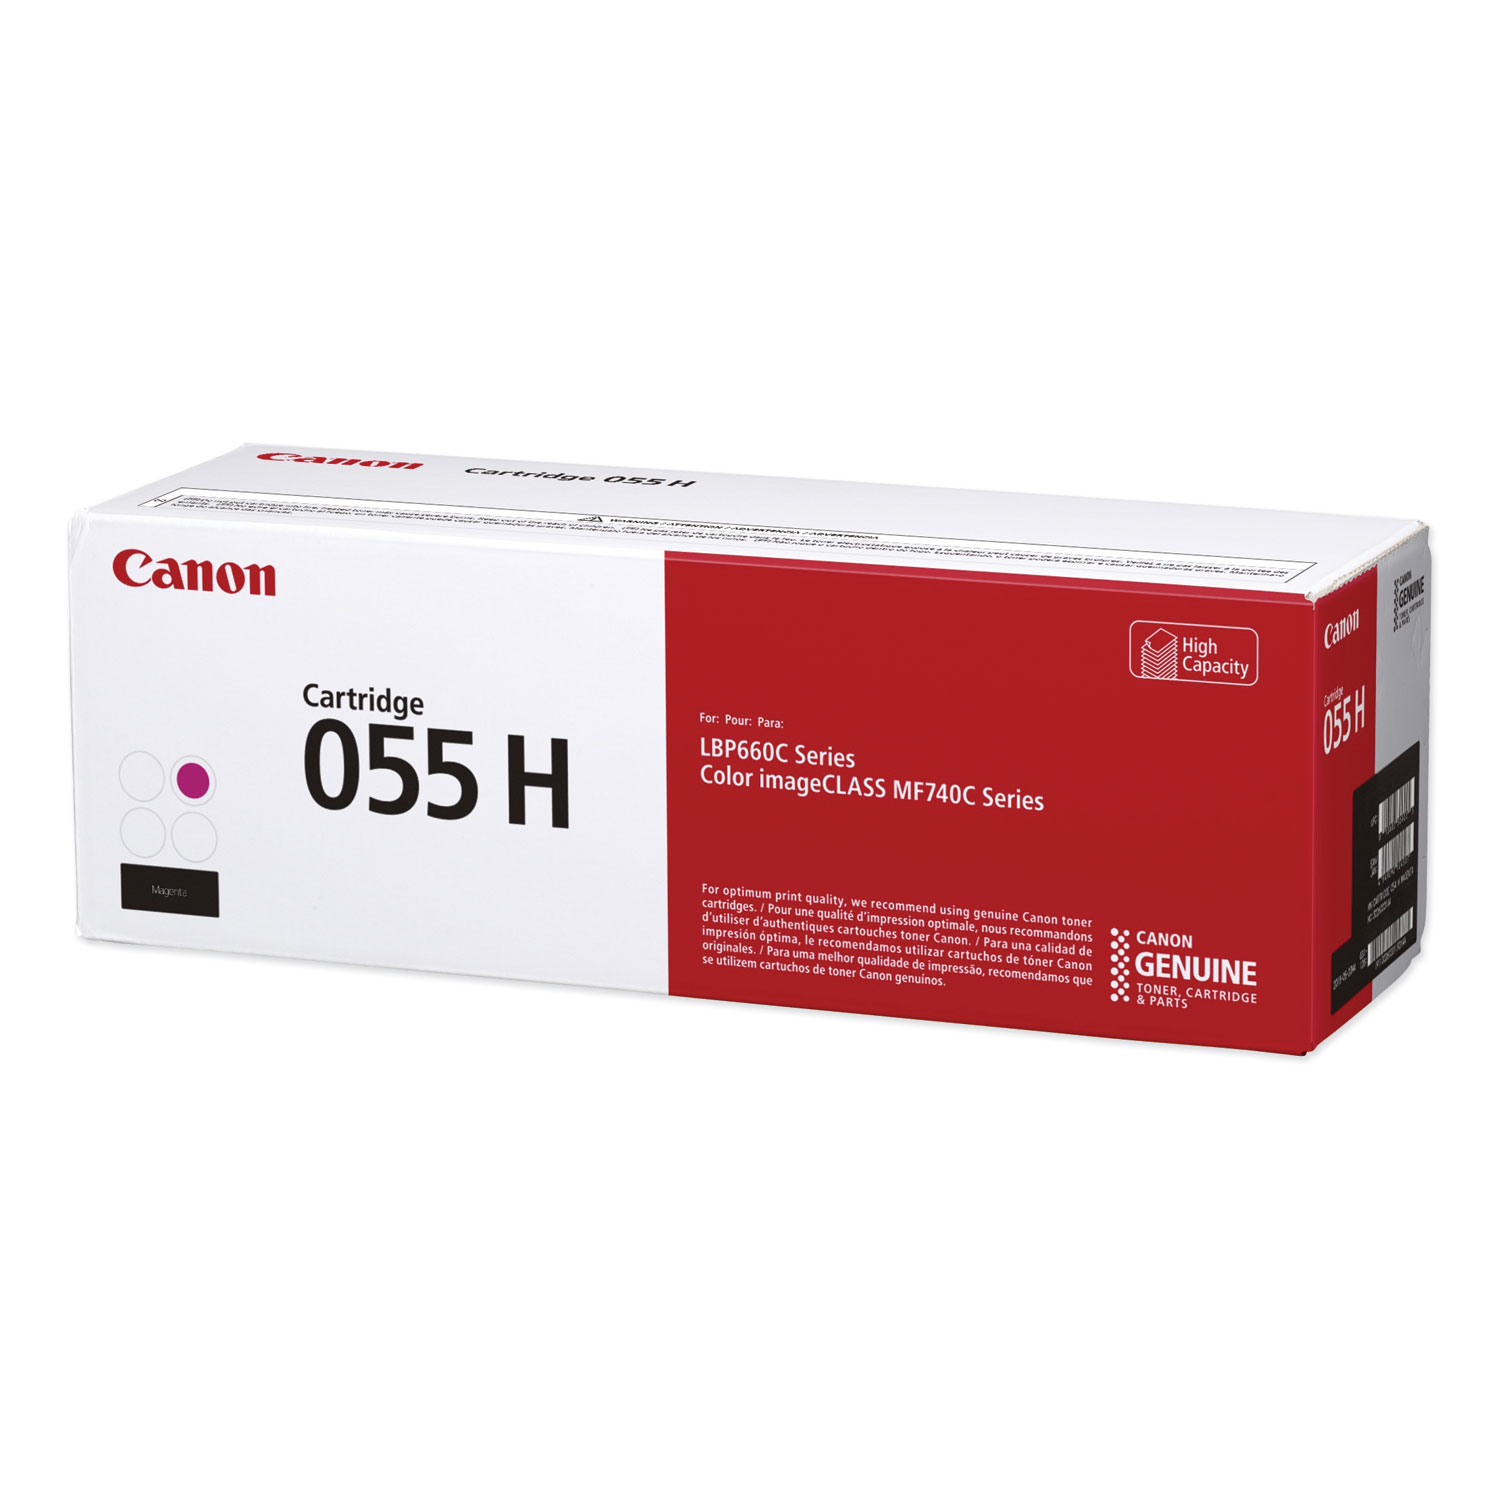  Canon 3018C001 3019C001 (055H) High-Yield Toner, 5,900 Page-Yield, Magenta (CNM3018C001) 